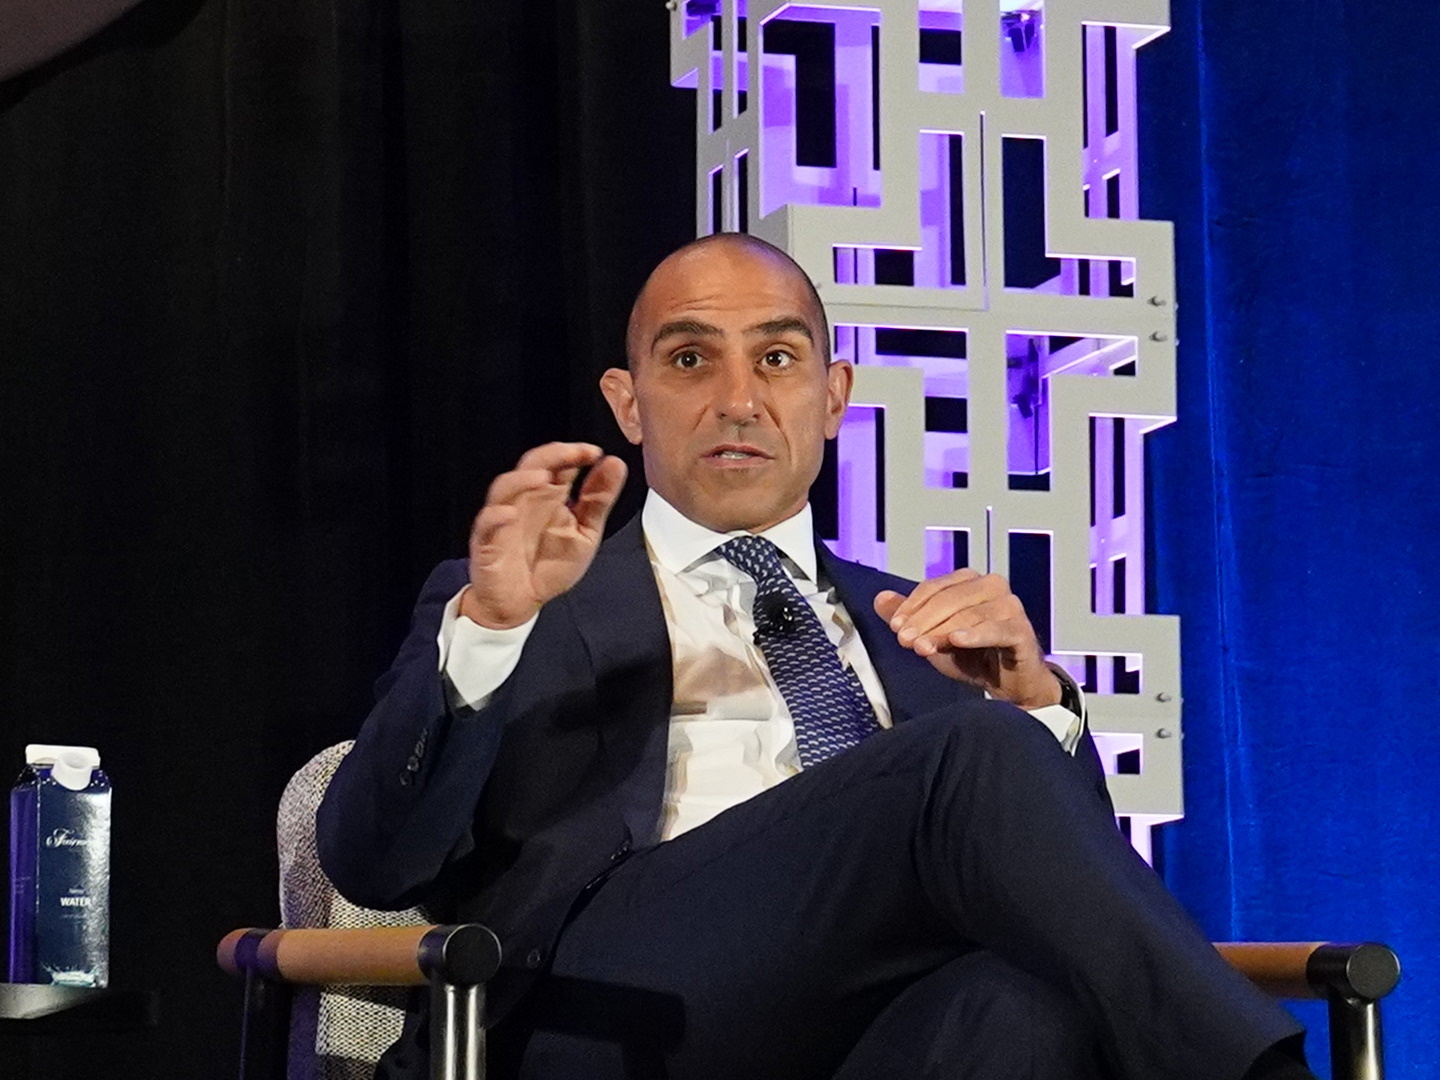 Bitcoin Could 'Double in Price' Under CFTC Regulation, Chairman Behnam Says